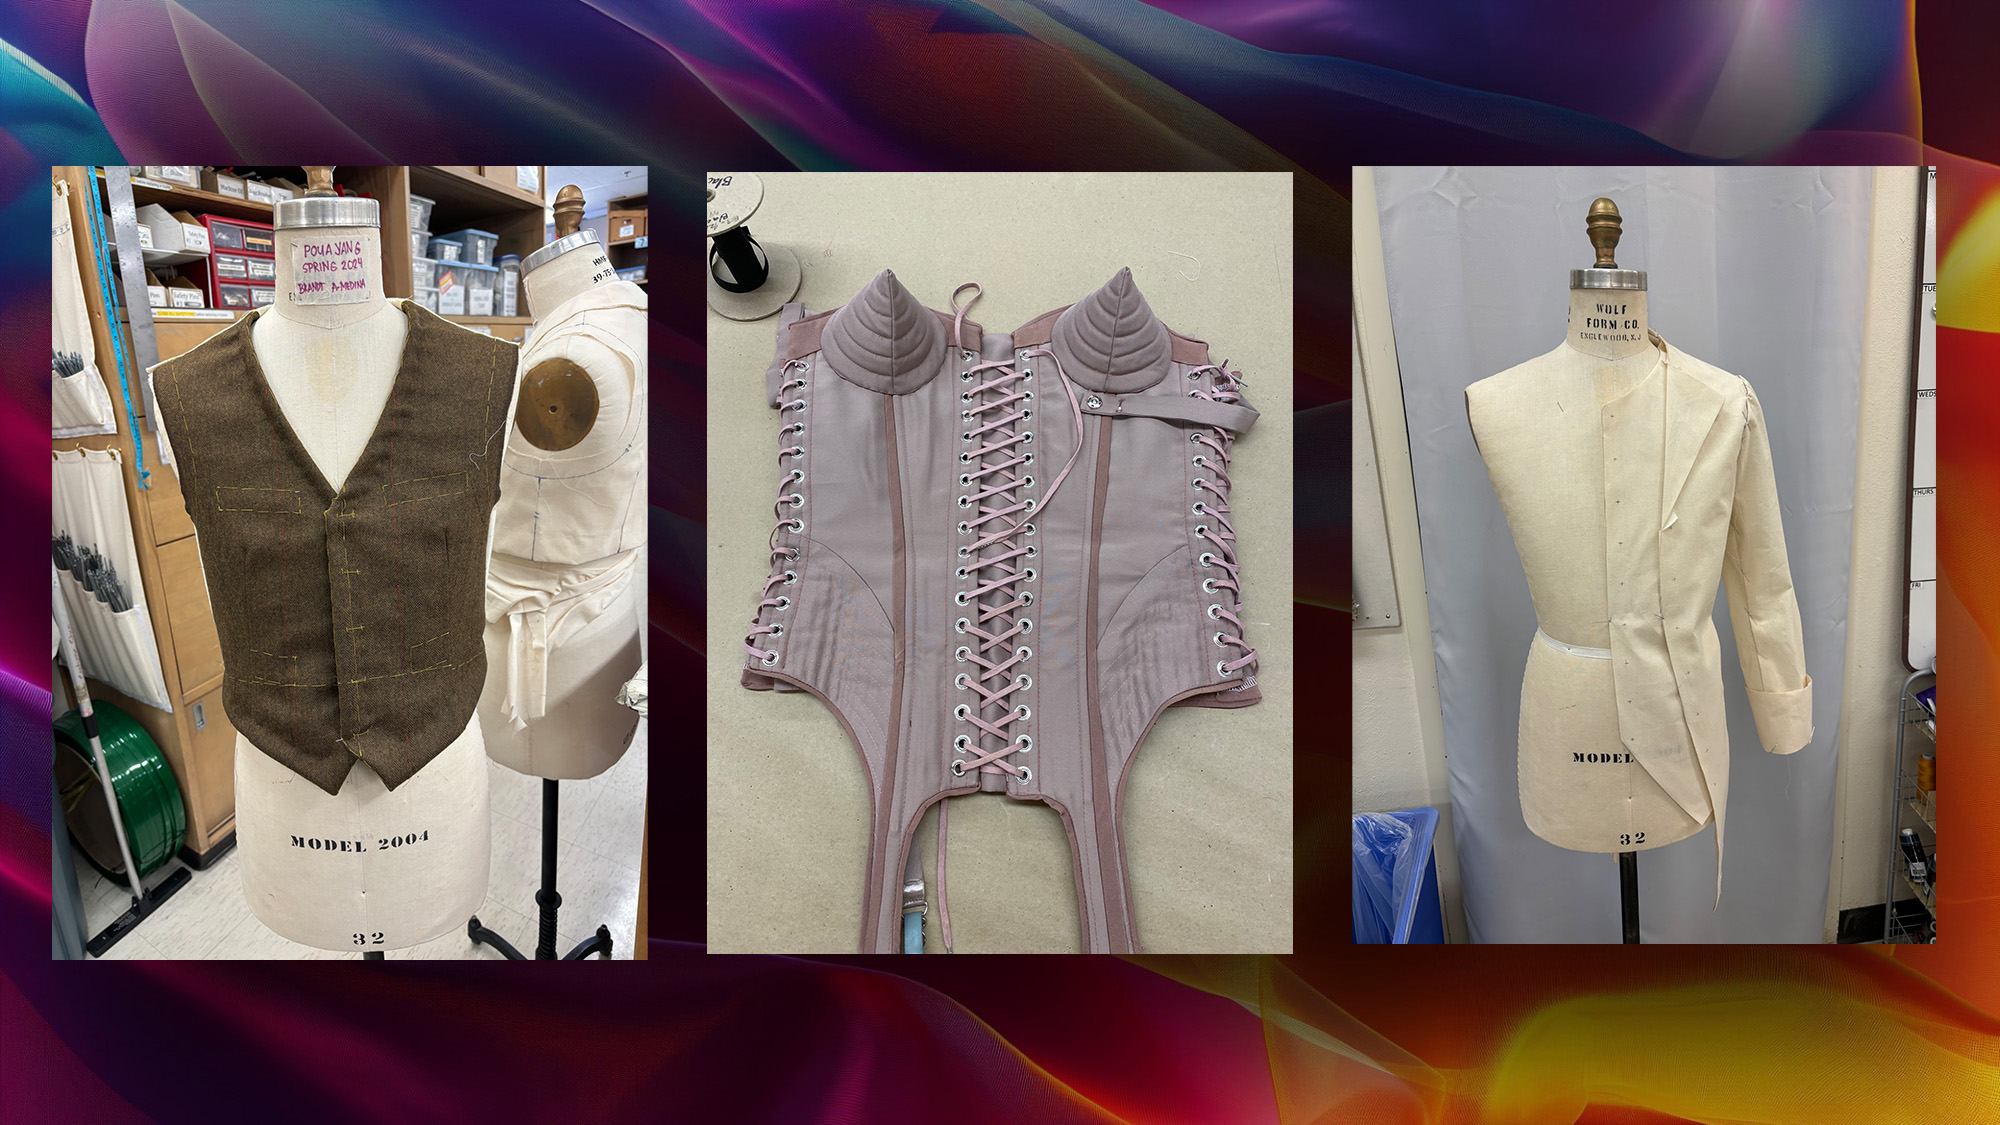 Three images on a multicolored field. The first image is a tailored vest of a dress form. The second image is cone-bra  corset top made out of mauve fabric with ornate lacings down the front and sides. the last image is of a muslin mock up of a suit jacket.